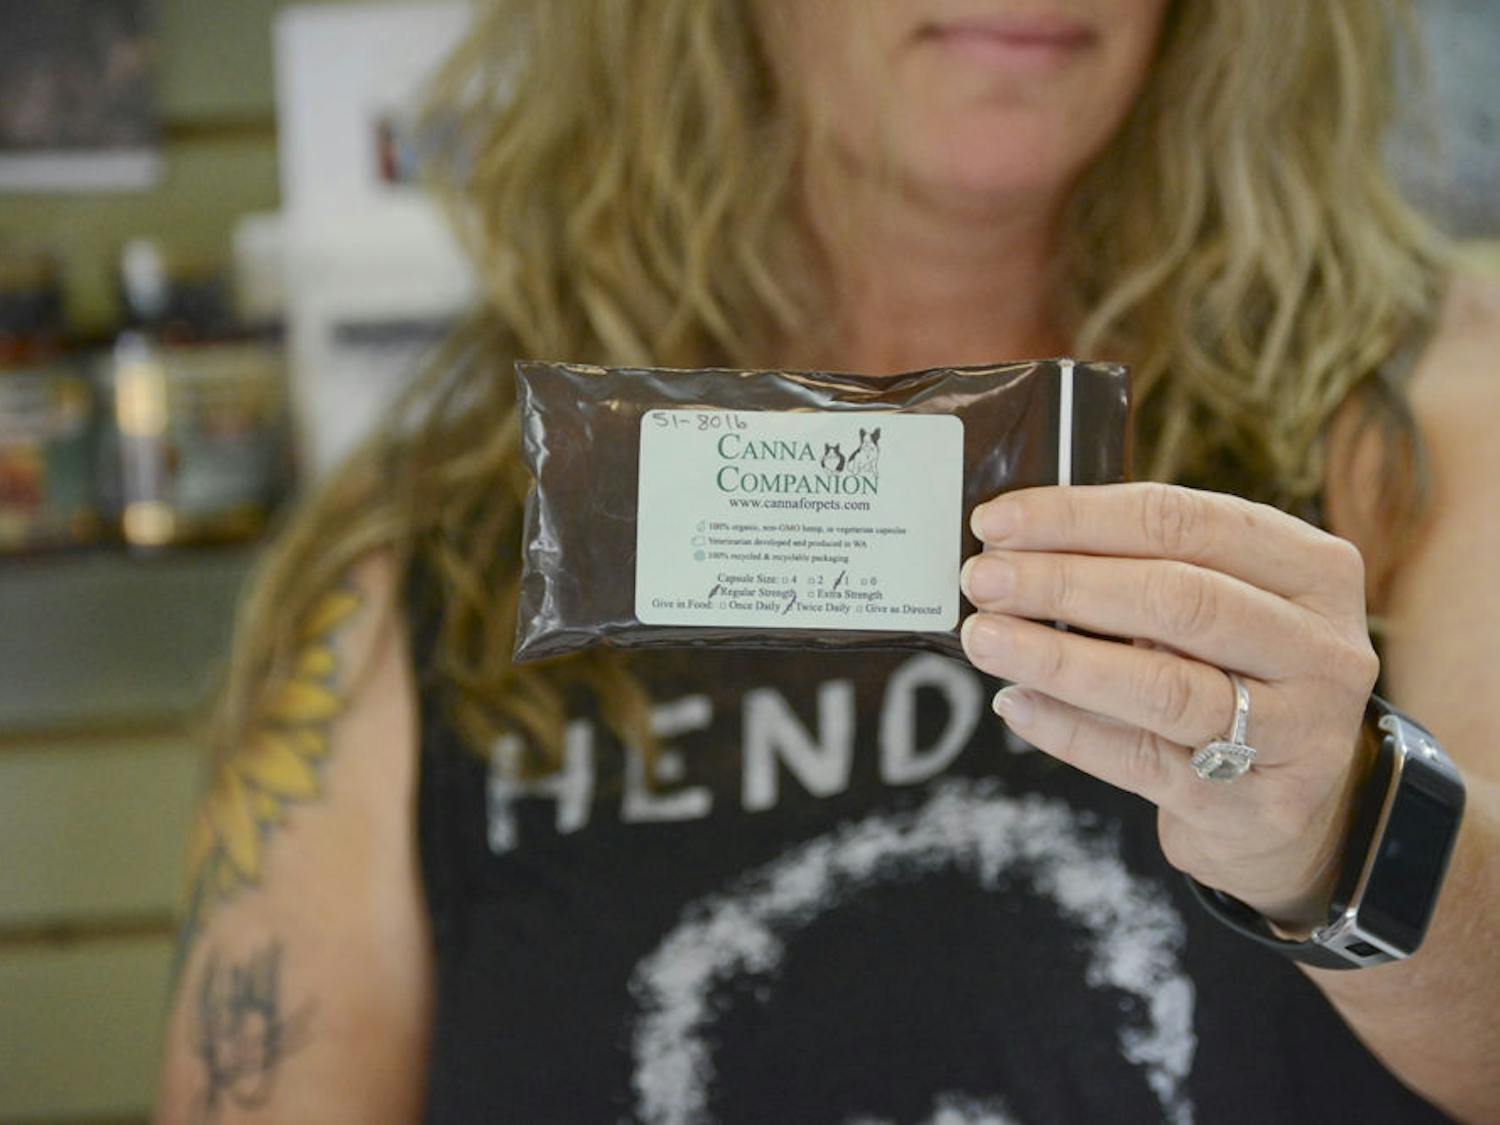 Kat Drawdy, 44, holds up a package of Canna Companion, a hemp-based supplement for pets. Drawdy and her partner, Joy, own the local pet store Earth Pets. The sale of the product touched off a controversy over the legality of hemp in Florida.